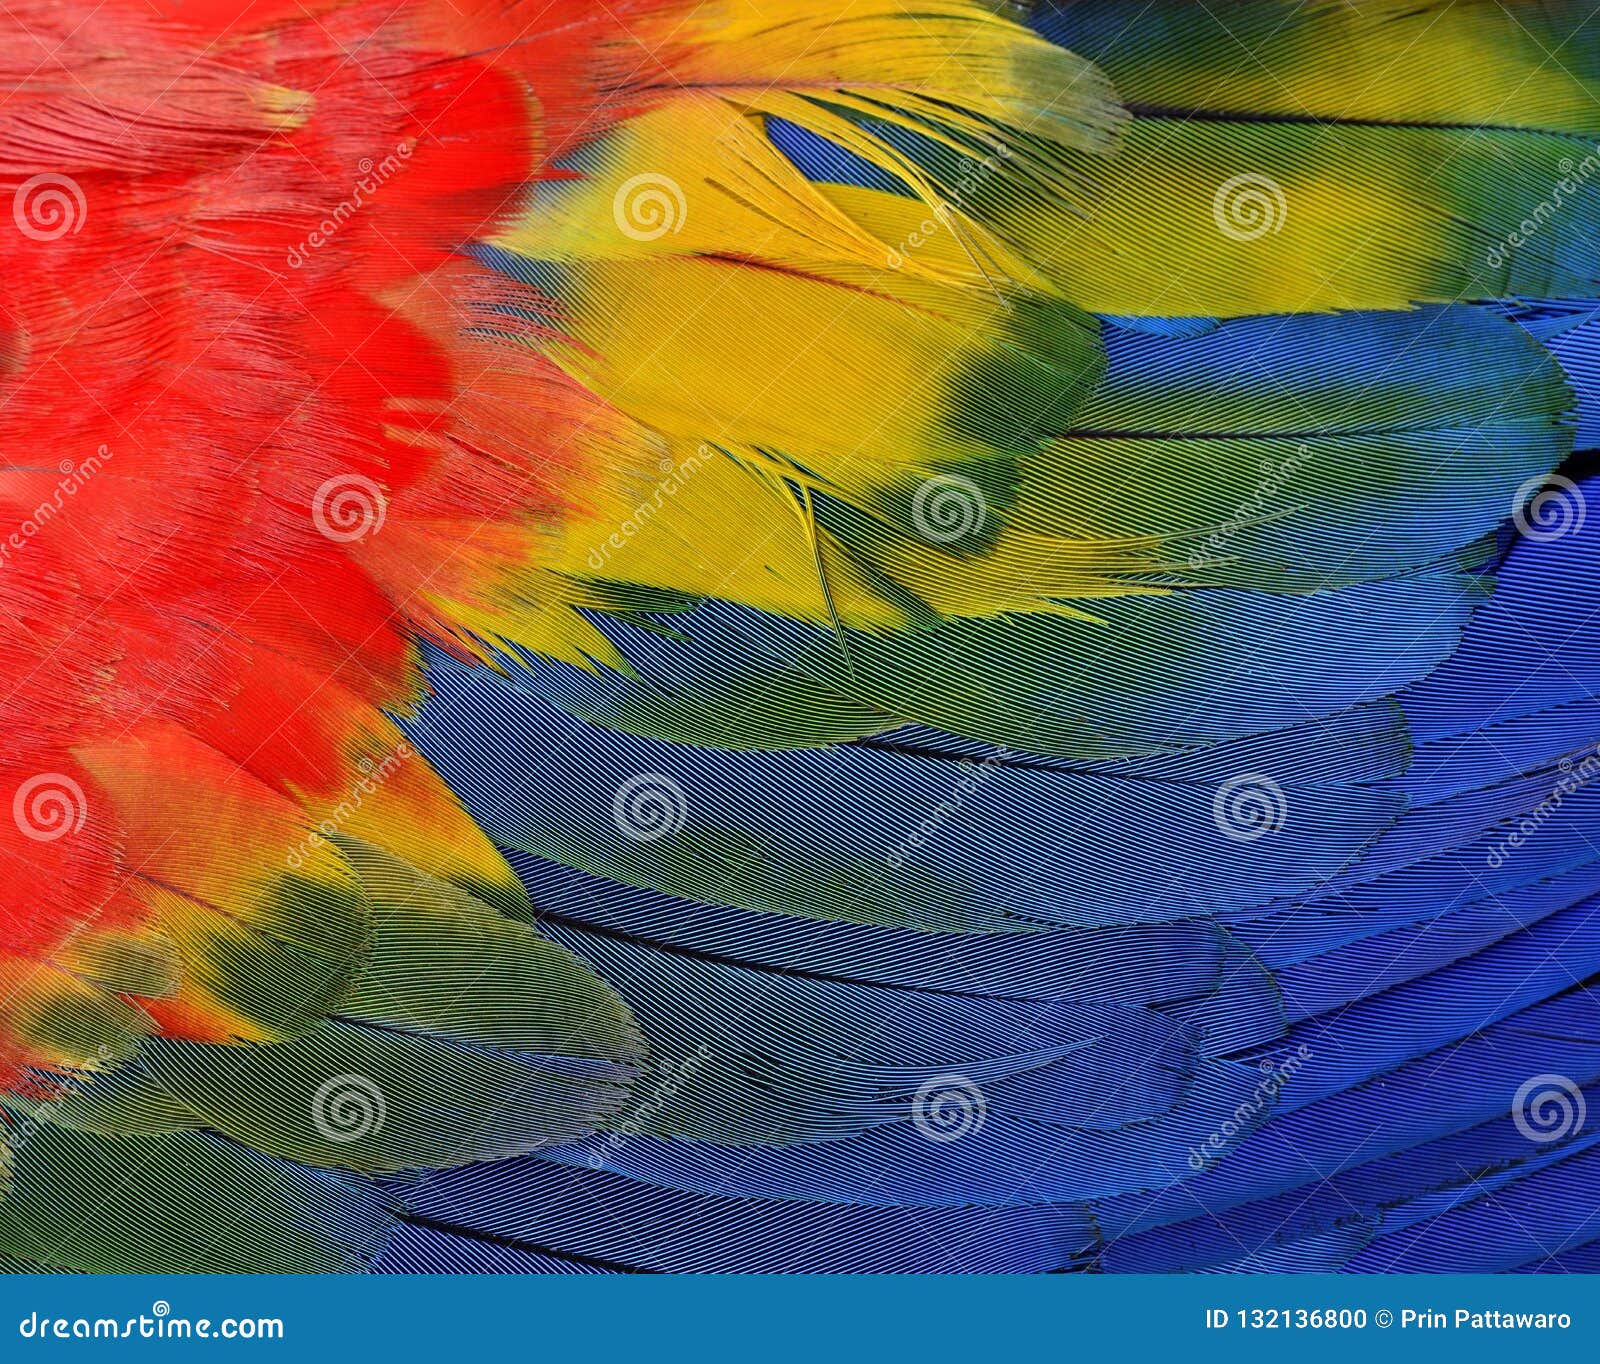 bautiful red, yellow and blue texture of scarlet macaw parrot bi